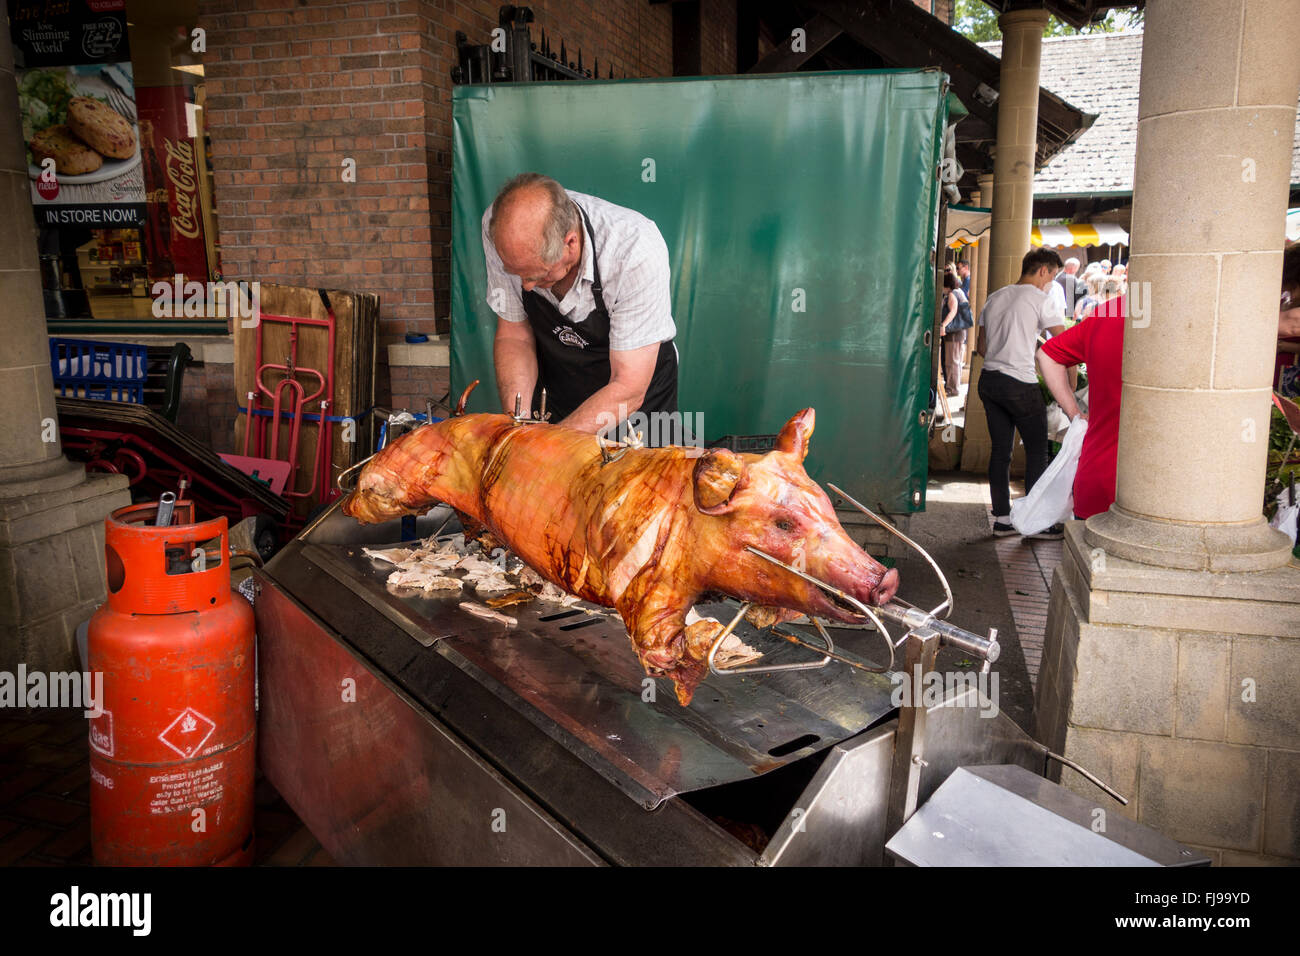 A man cutting meat from a roasted hog on a spit, Stroud Farmer's Market, Gloucestershire Stock Photo